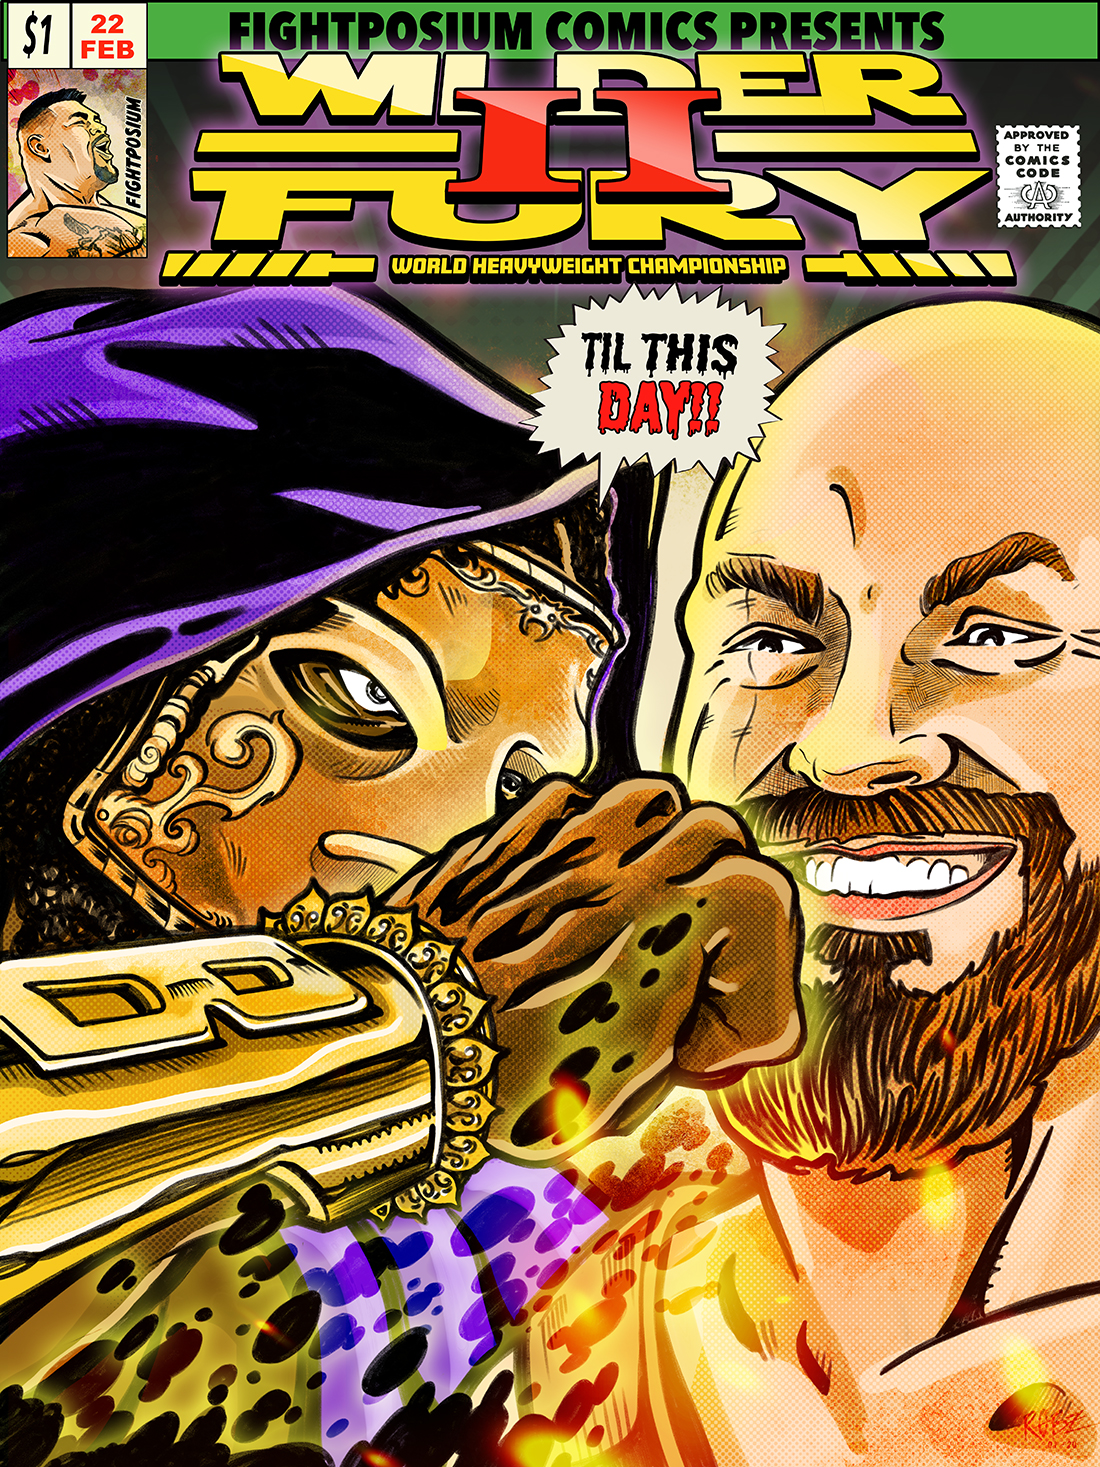 Read more about the article Wilder VS Fury II – Till This Day!